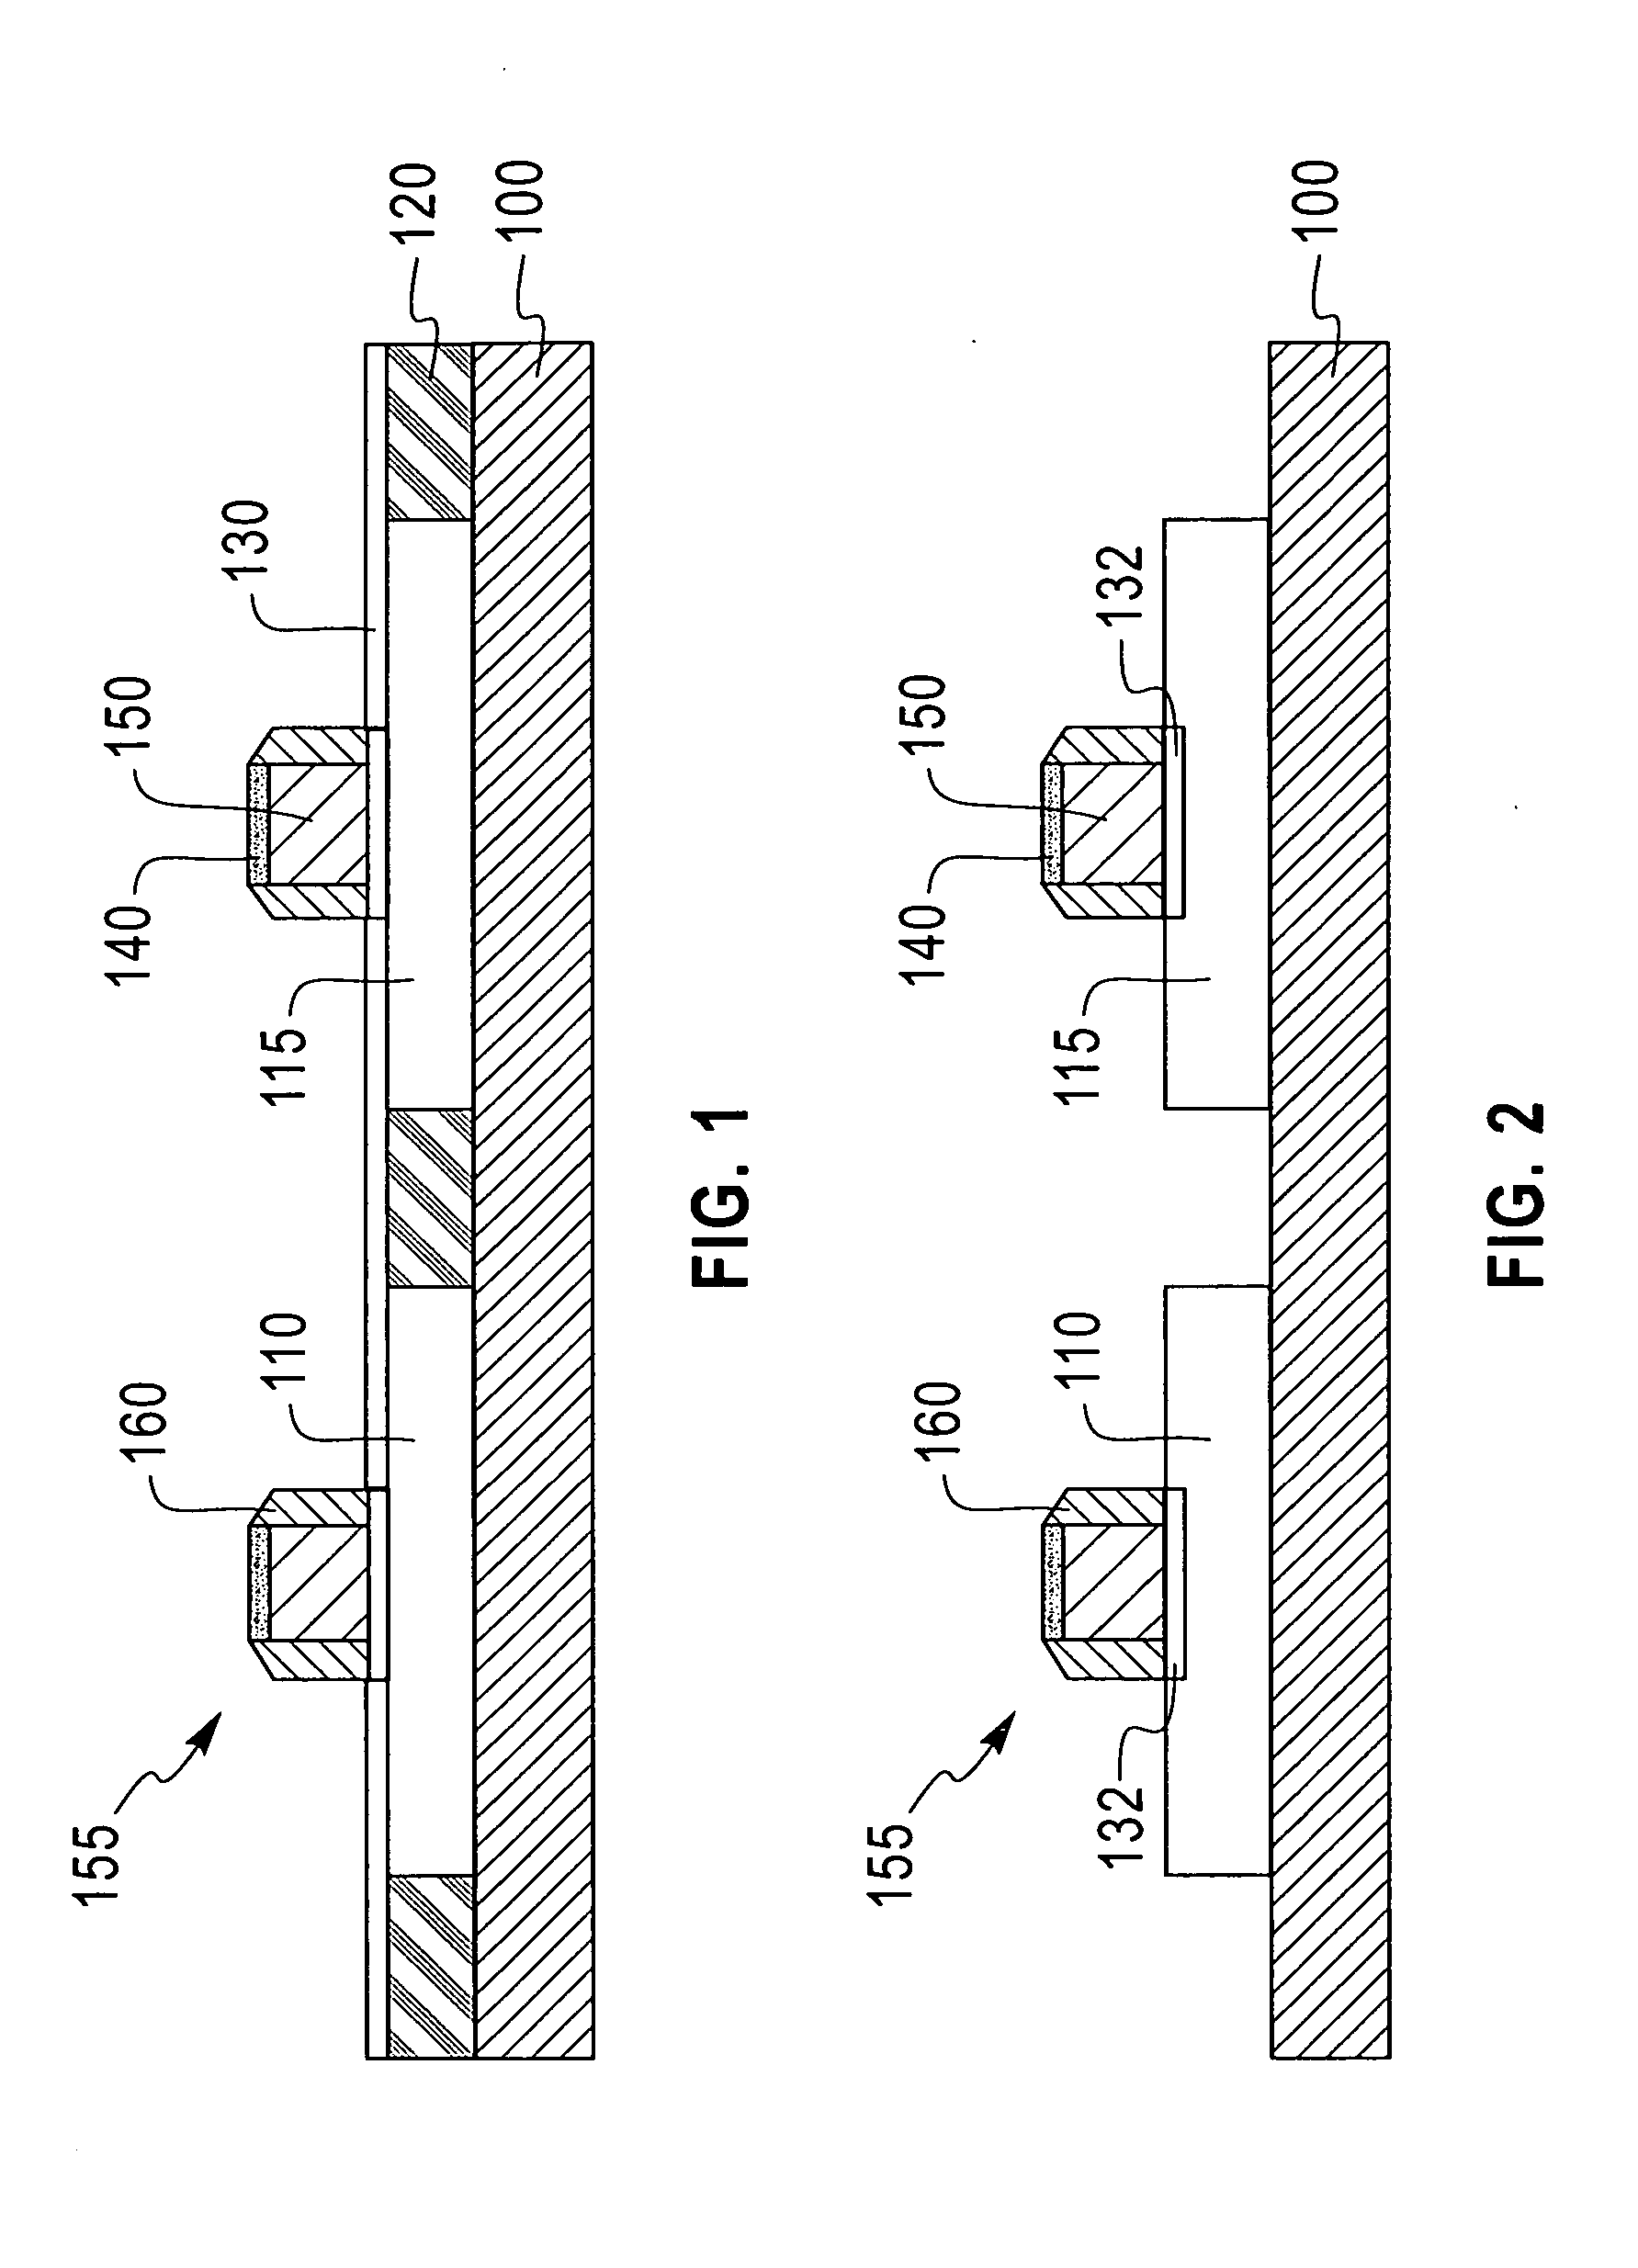 Method and structure to reduce contact resistance on thin silicon-on-insulator device